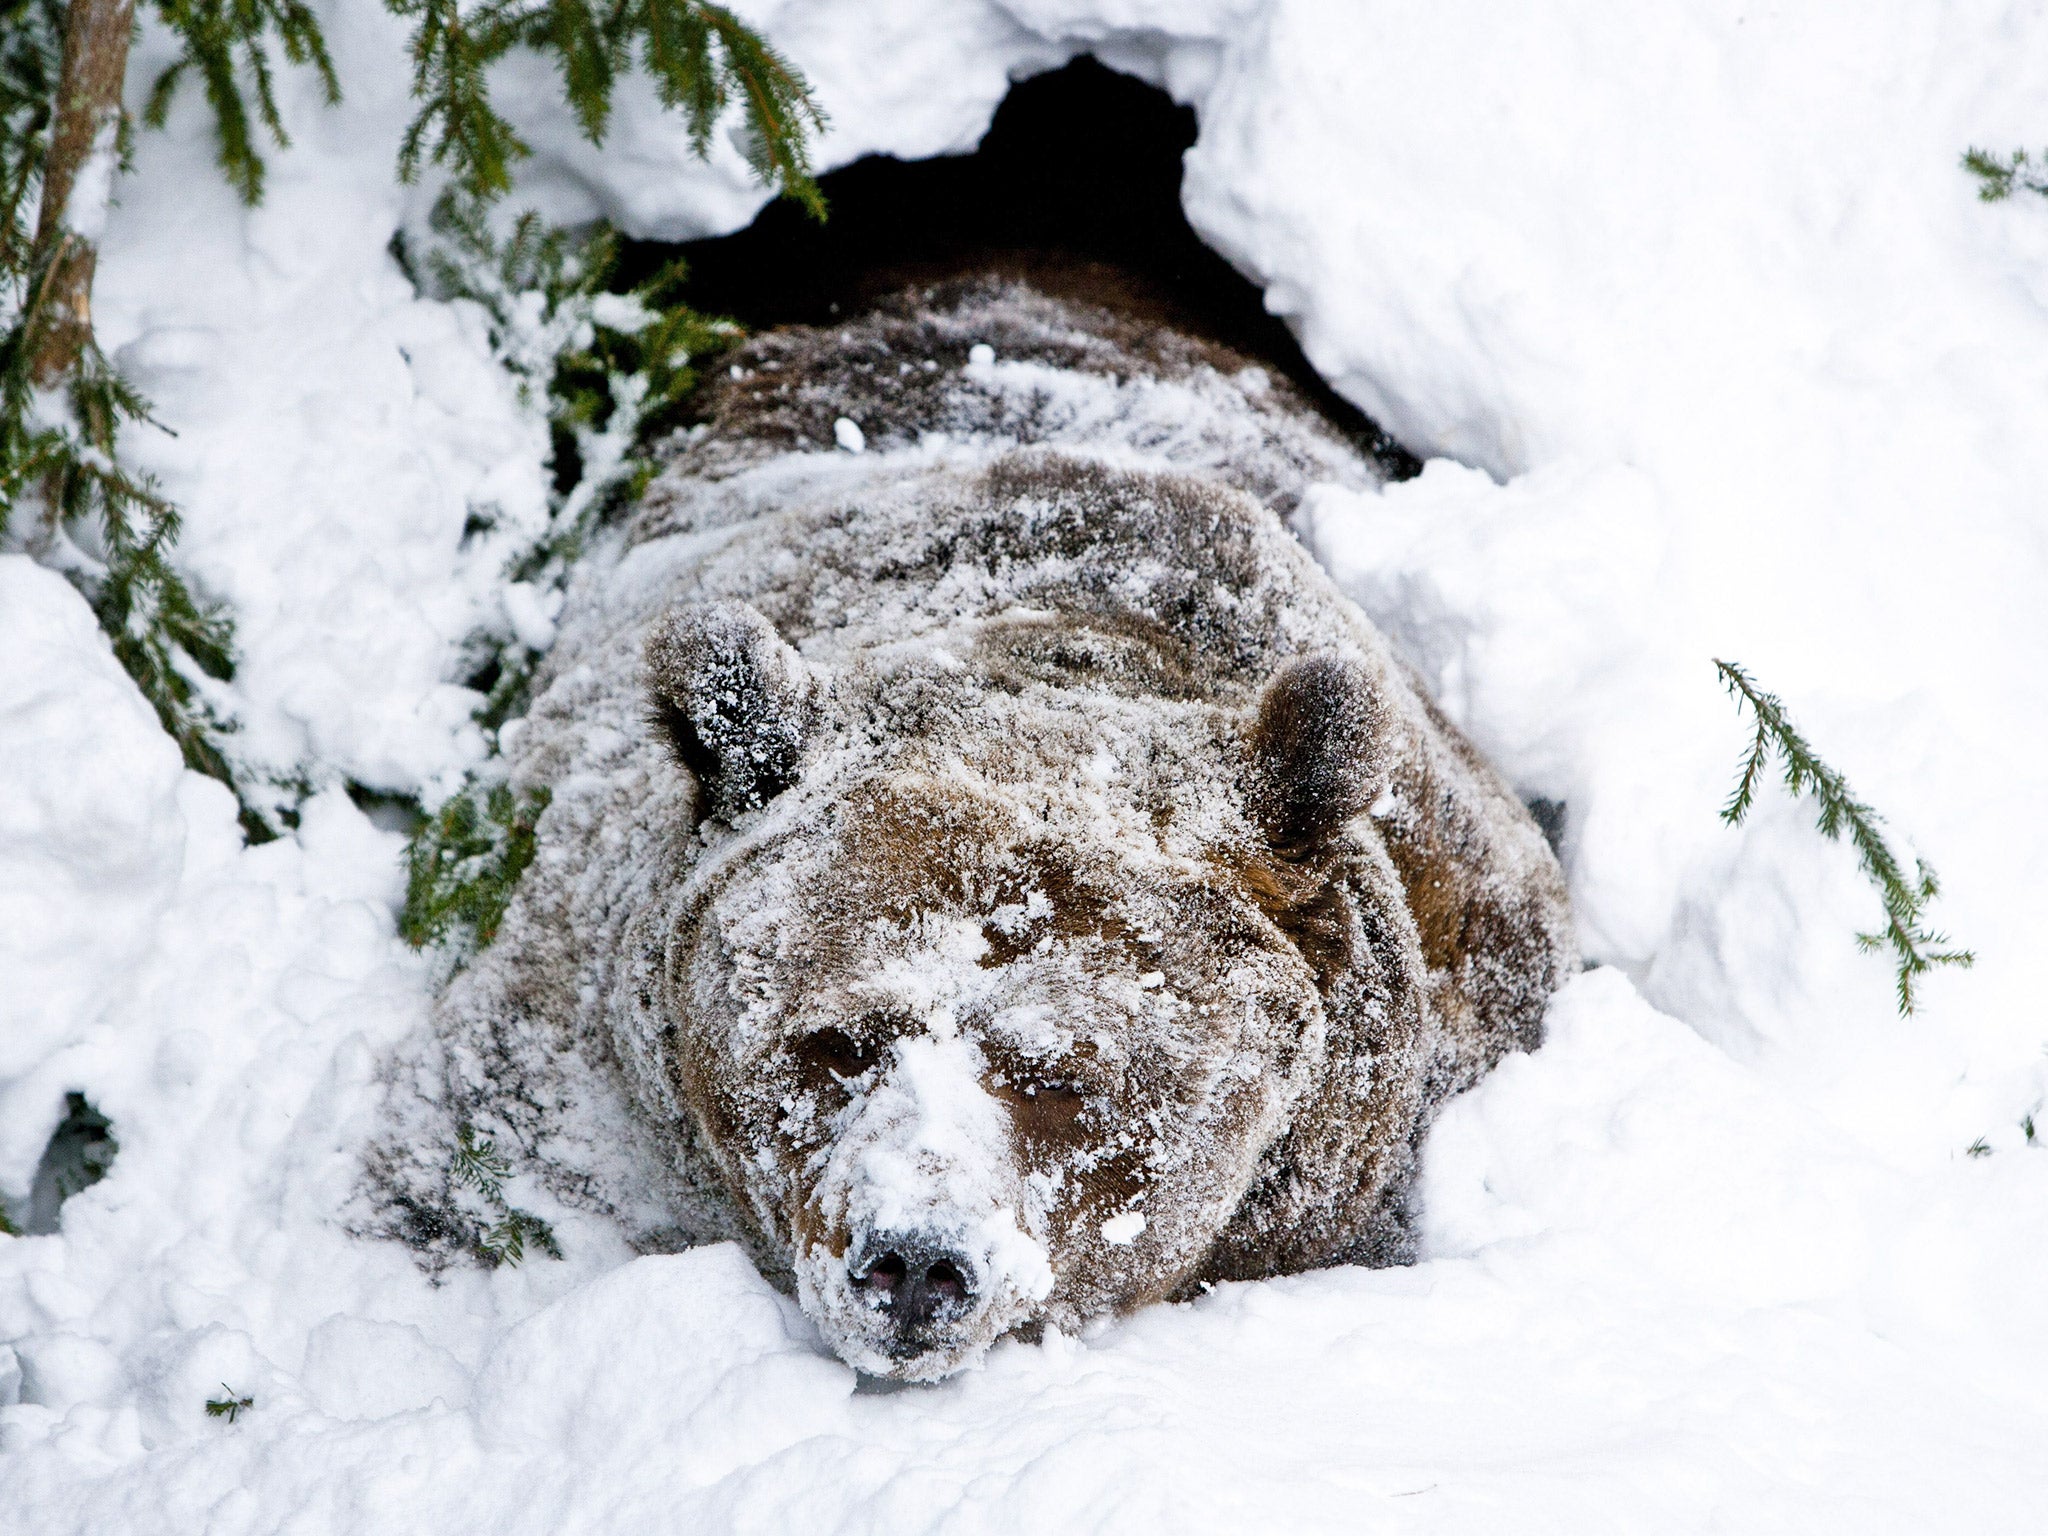 A male brown bear wakes up after winter hibernation